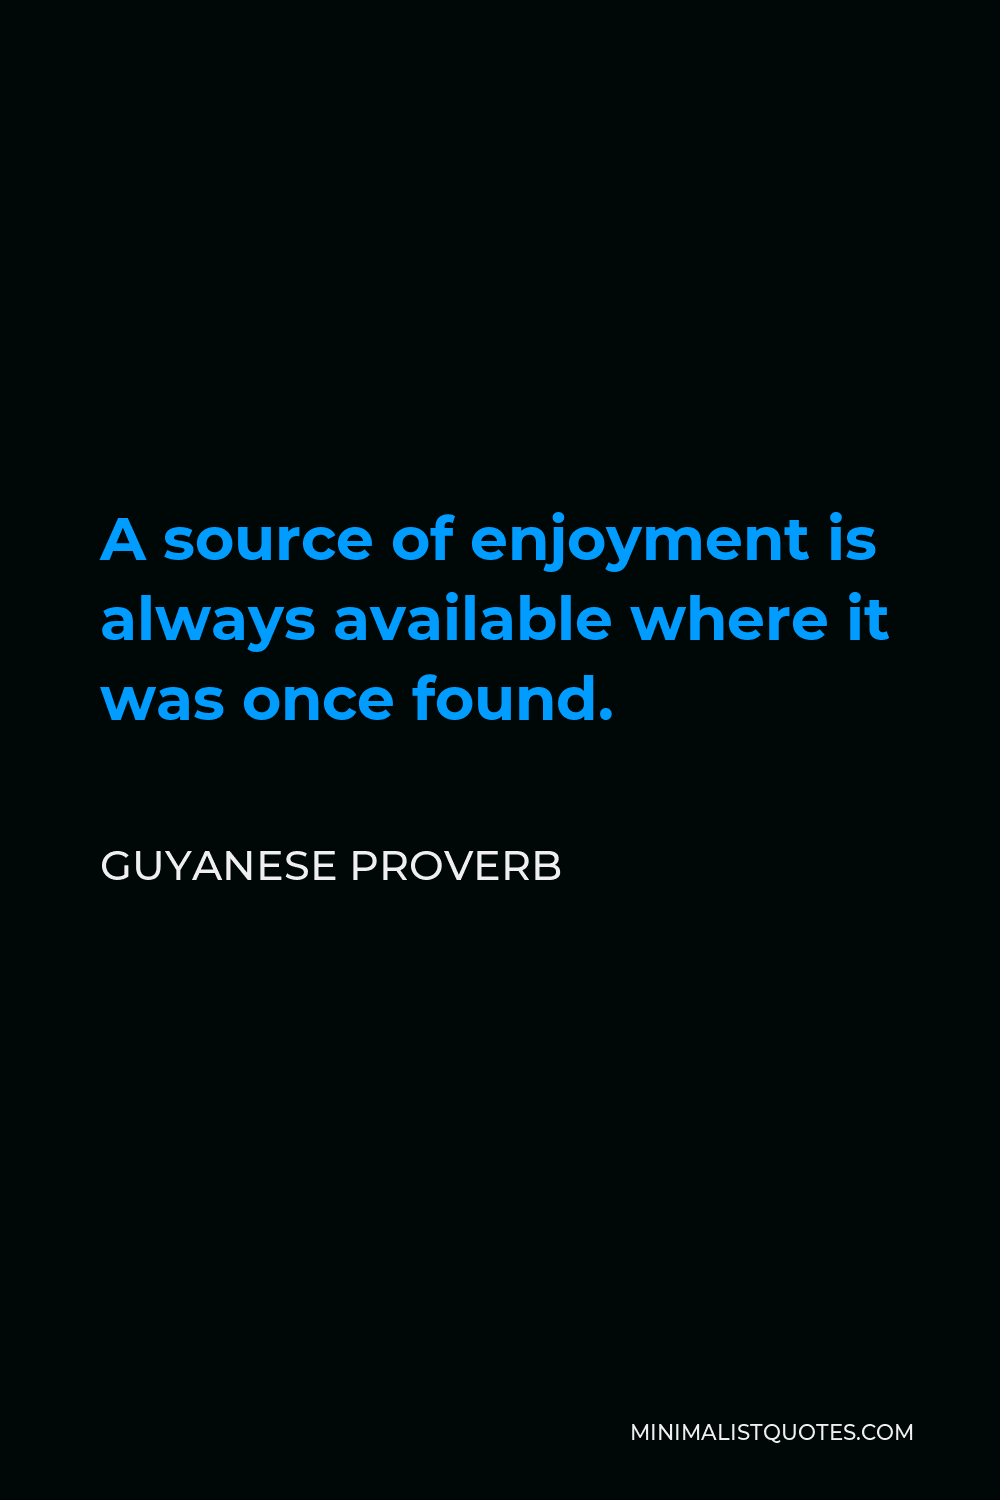 Guyanese Proverb Quote - A source of enjoyment is always available where it was once found.